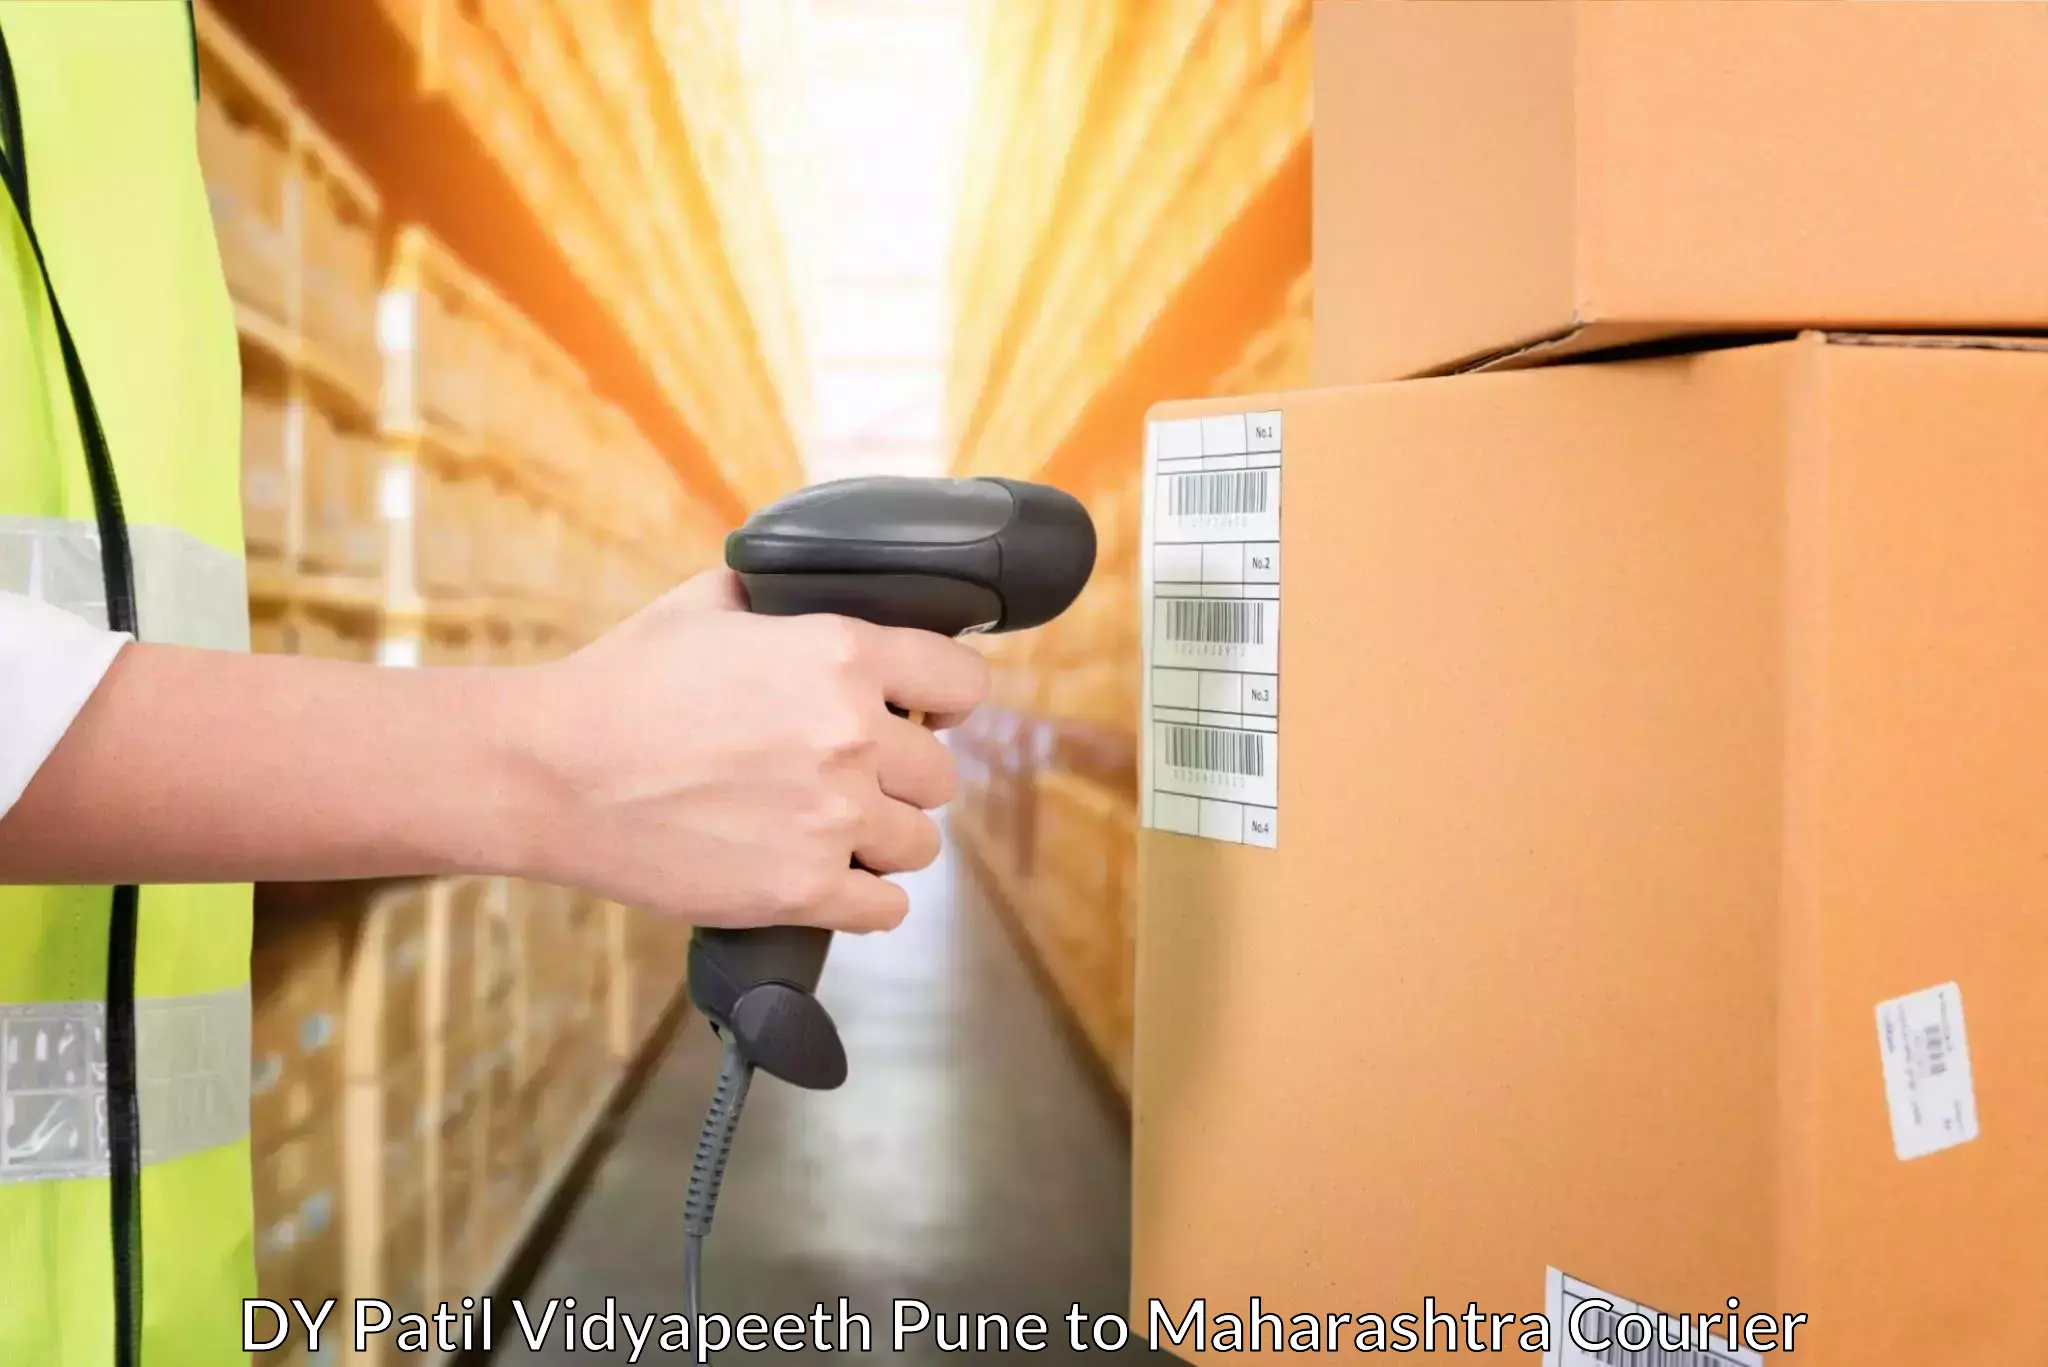 Budget-friendly shipping in DY Patil Vidyapeeth Pune to Gondpipri